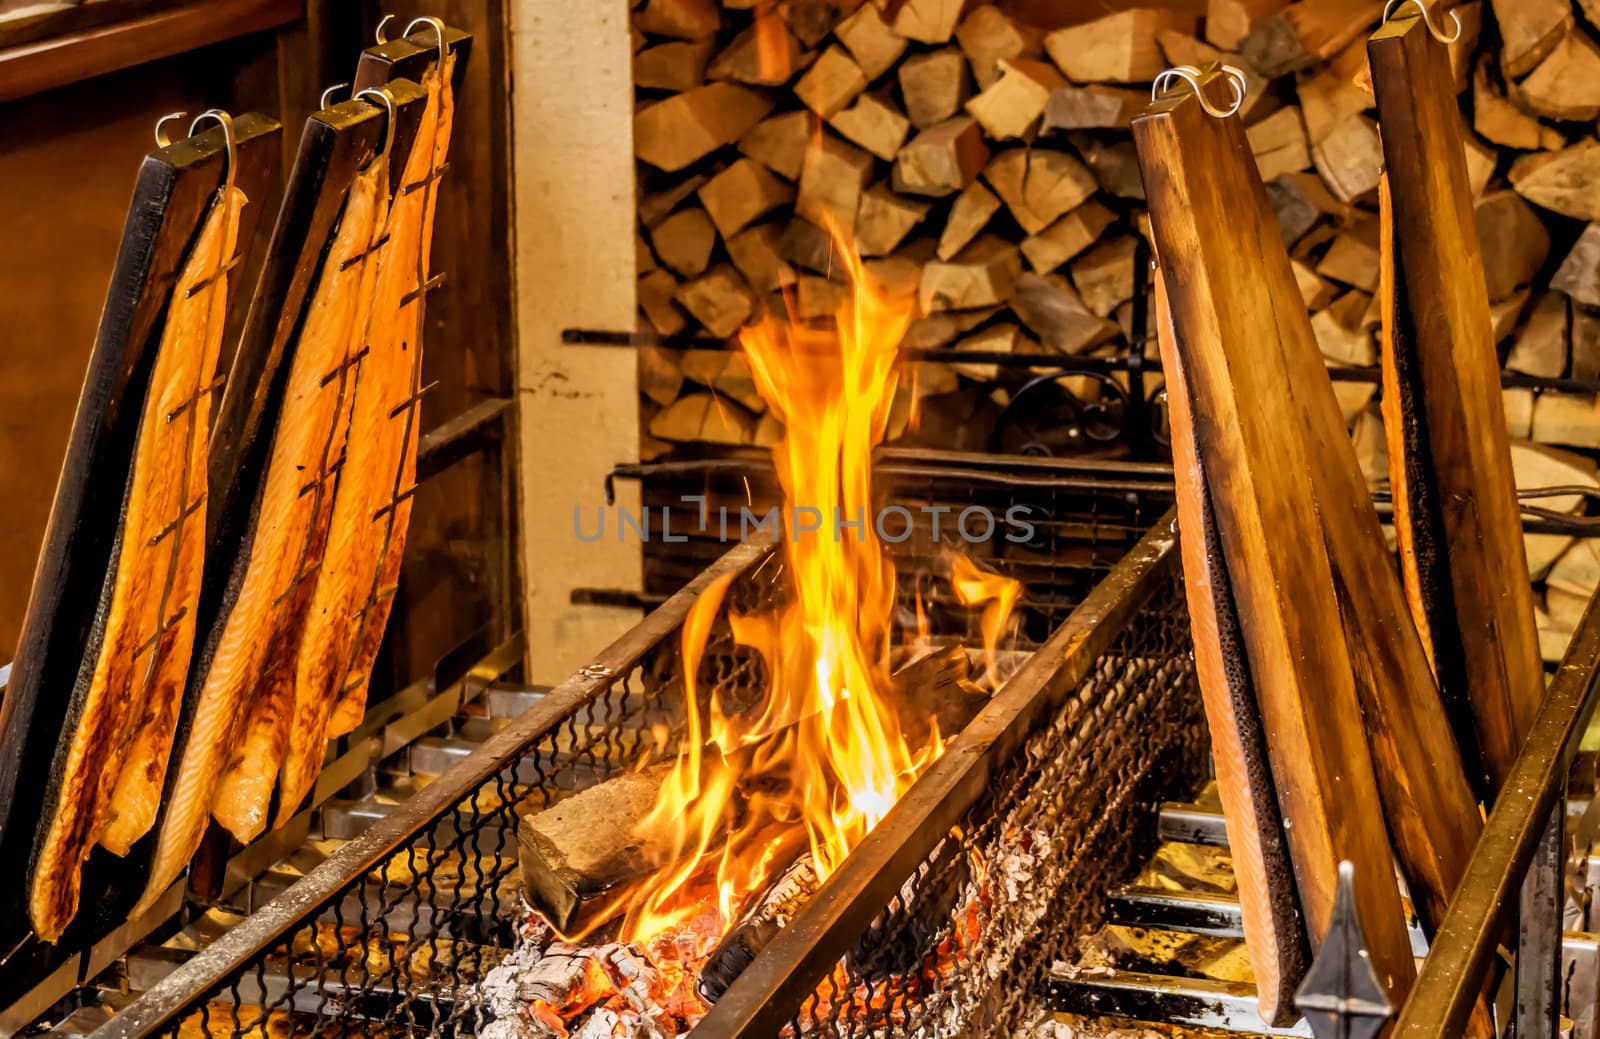 Flame salmon is a Scandinavian speciality that has now reached the German Christmas markets.